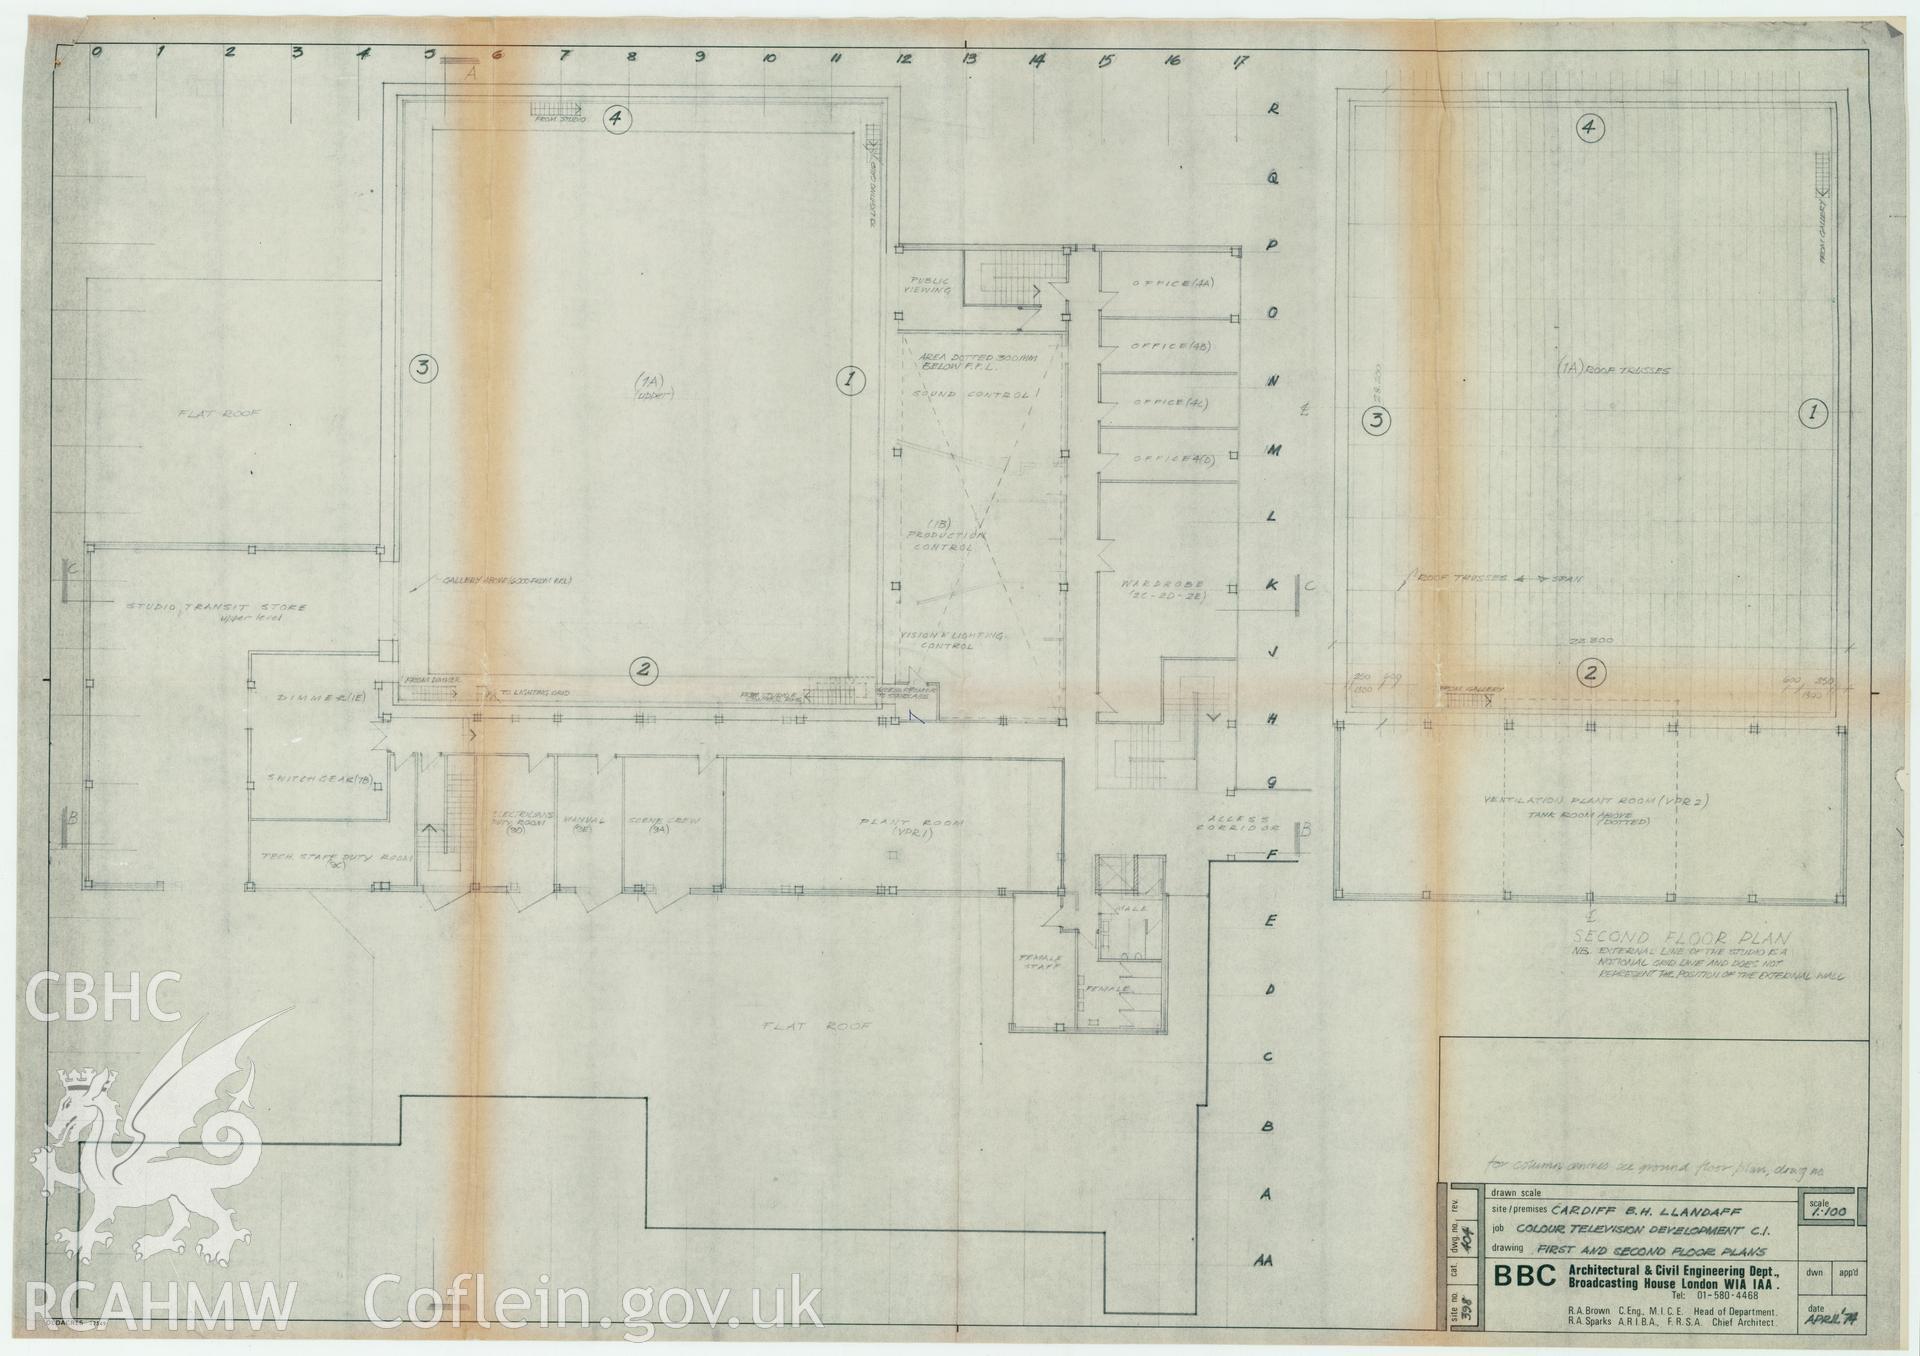 Digitised drawing plan of Llandaff production studio C1- Colour TV development. First and second floor plan. Drawing no. 404, April 1974.